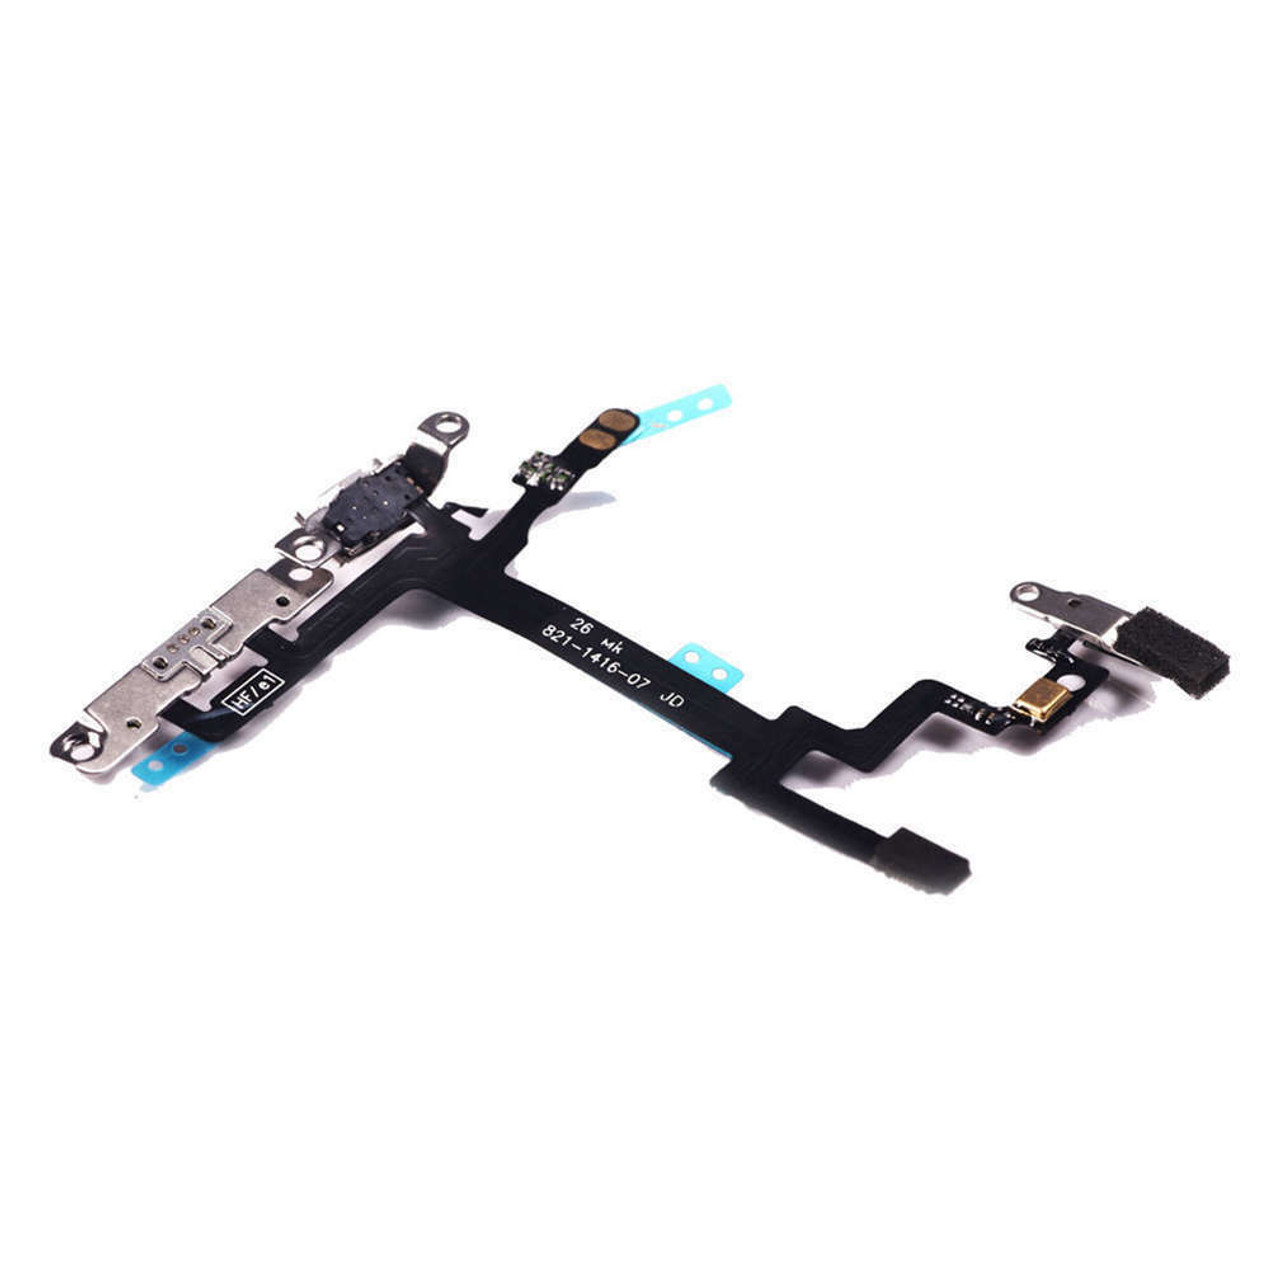 Power Button Volume Silent/Mute Switch Flex Cable For All iPad Mini 2/3 WiFi 4G